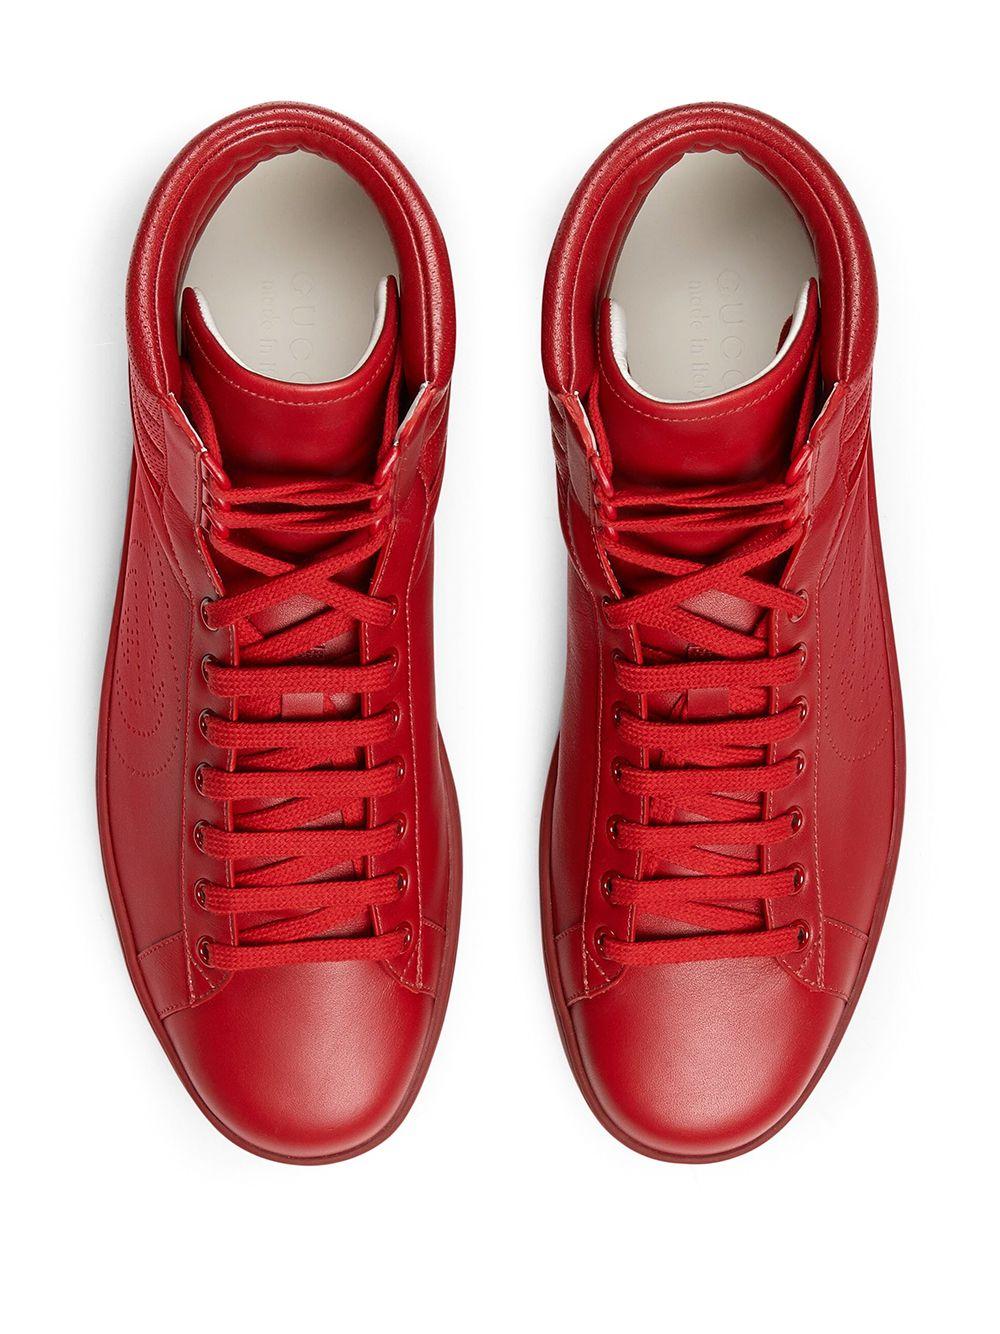 Vertrouwen op Corroderen Consequent Gucci High-top Ace Sneaker in Red for Men | Lyst